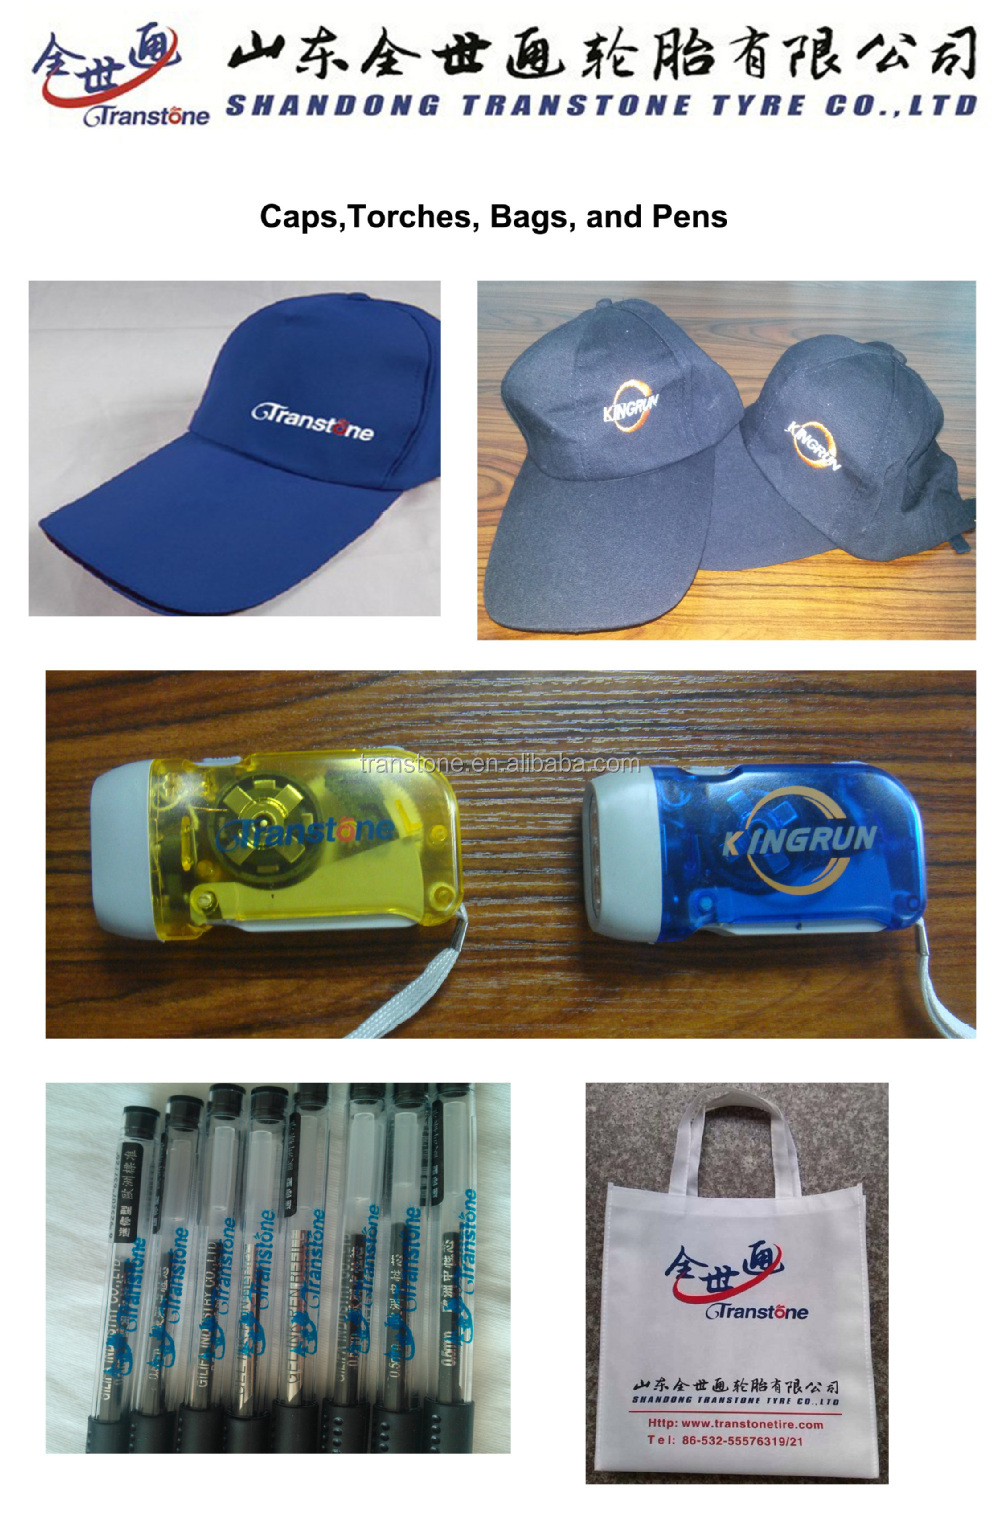 Caps, torches, bags and pens